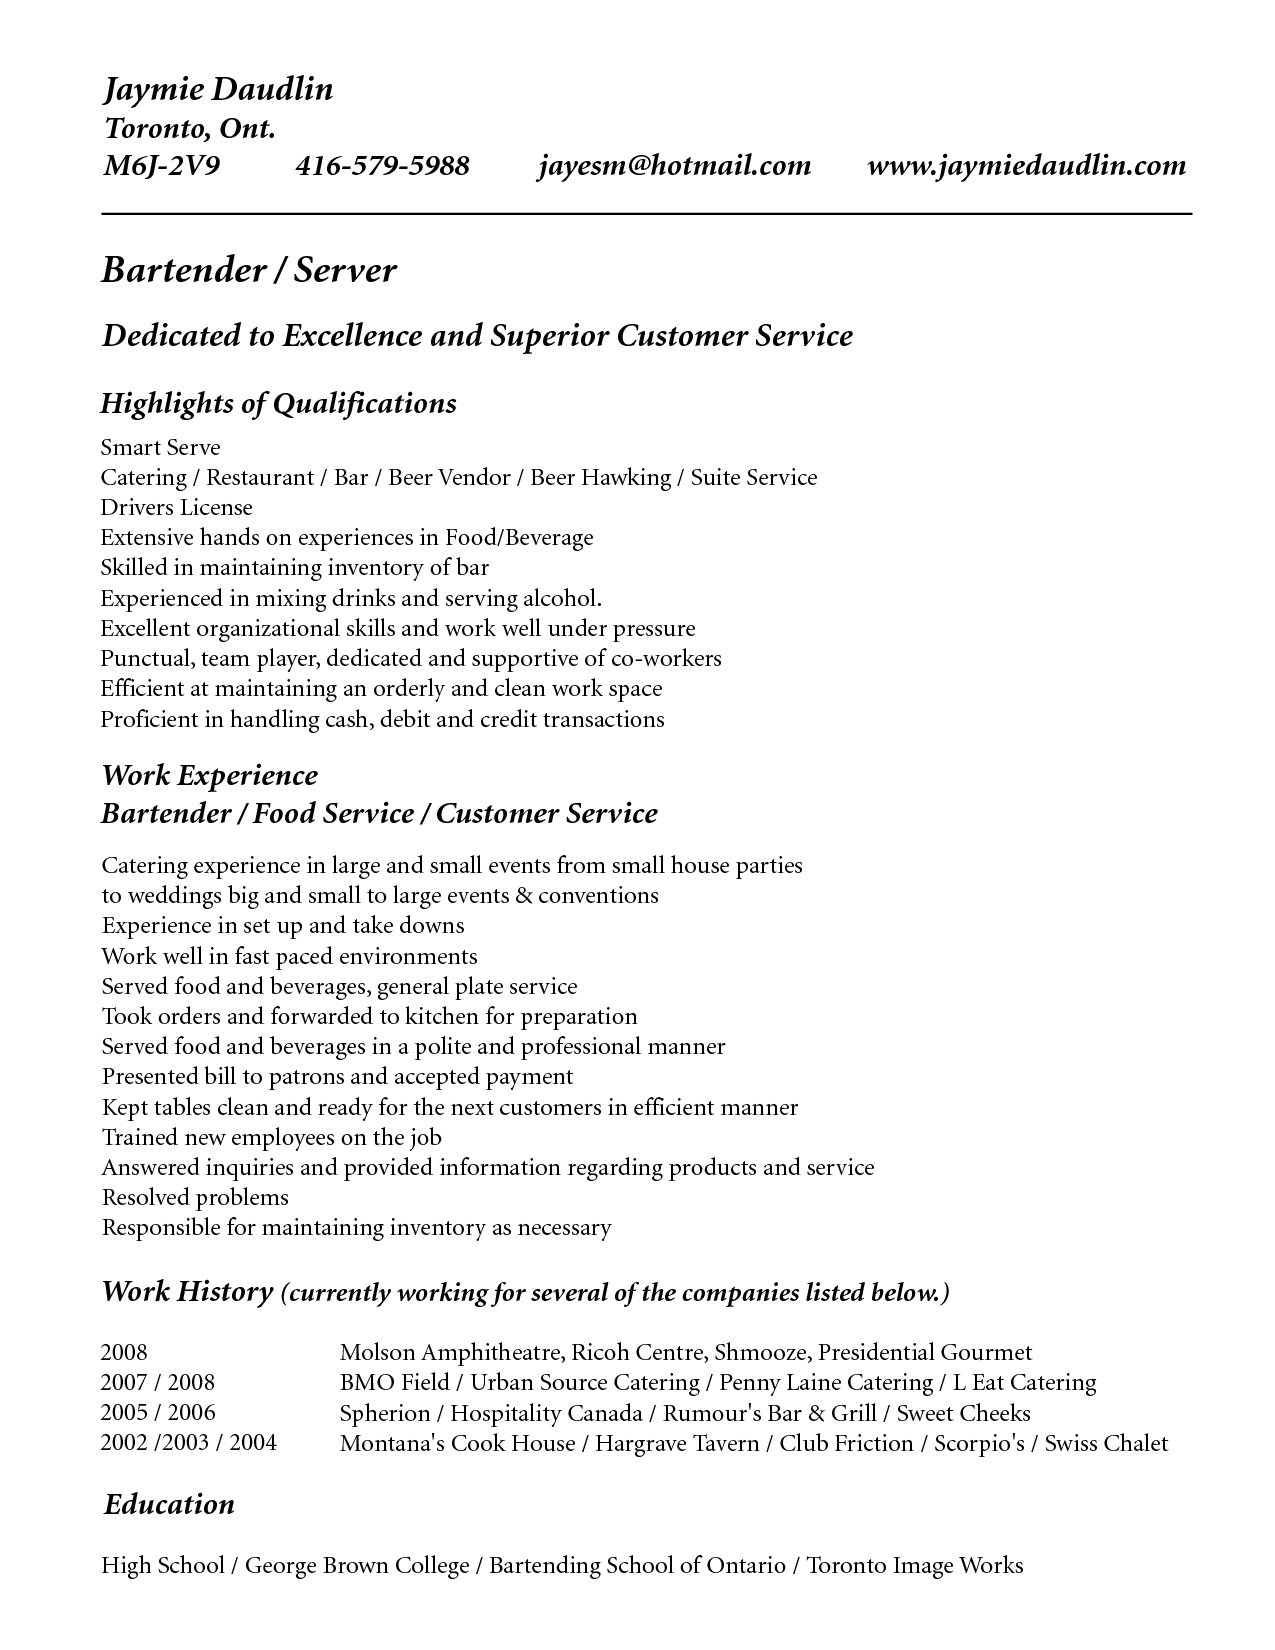 bartender resume sample free april onthemarch co